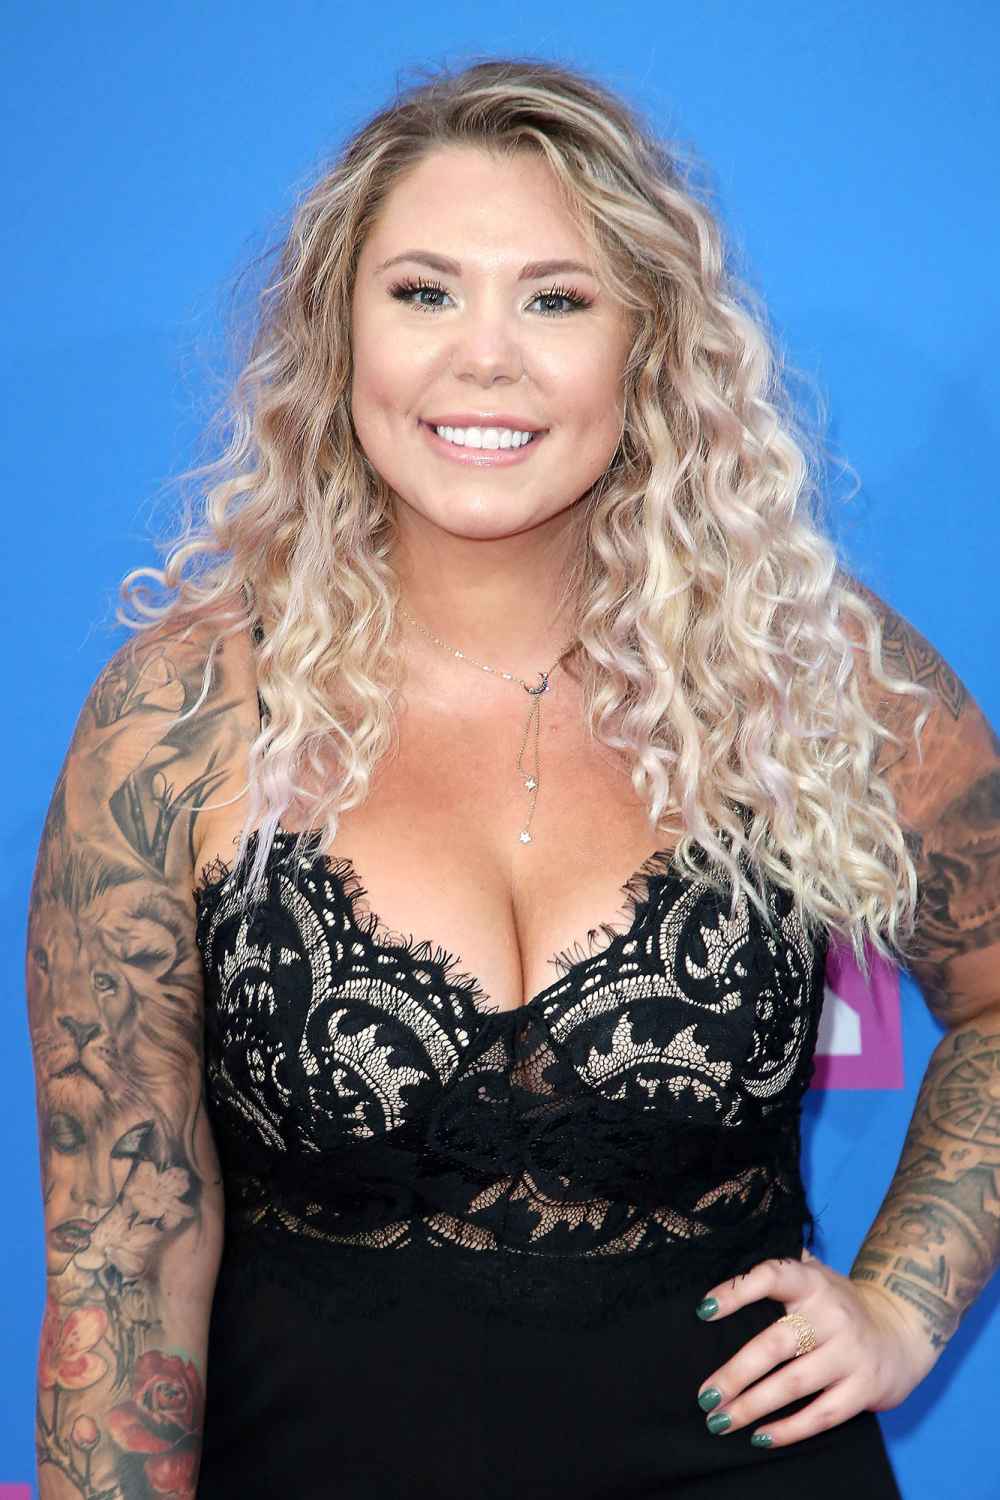 Kailyn Lowry MTV Video Music Awards